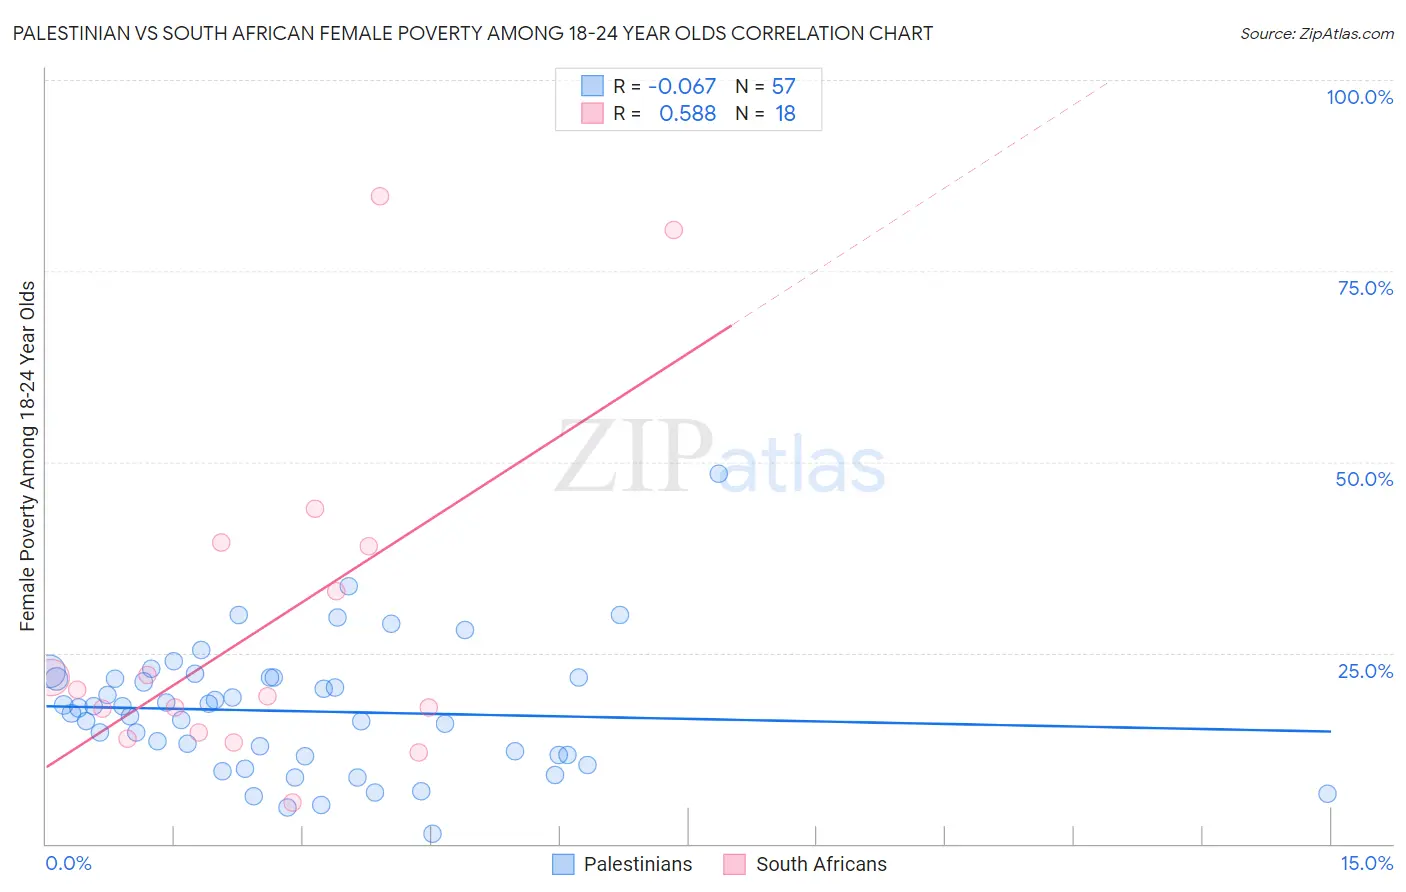 Palestinian vs South African Female Poverty Among 18-24 Year Olds